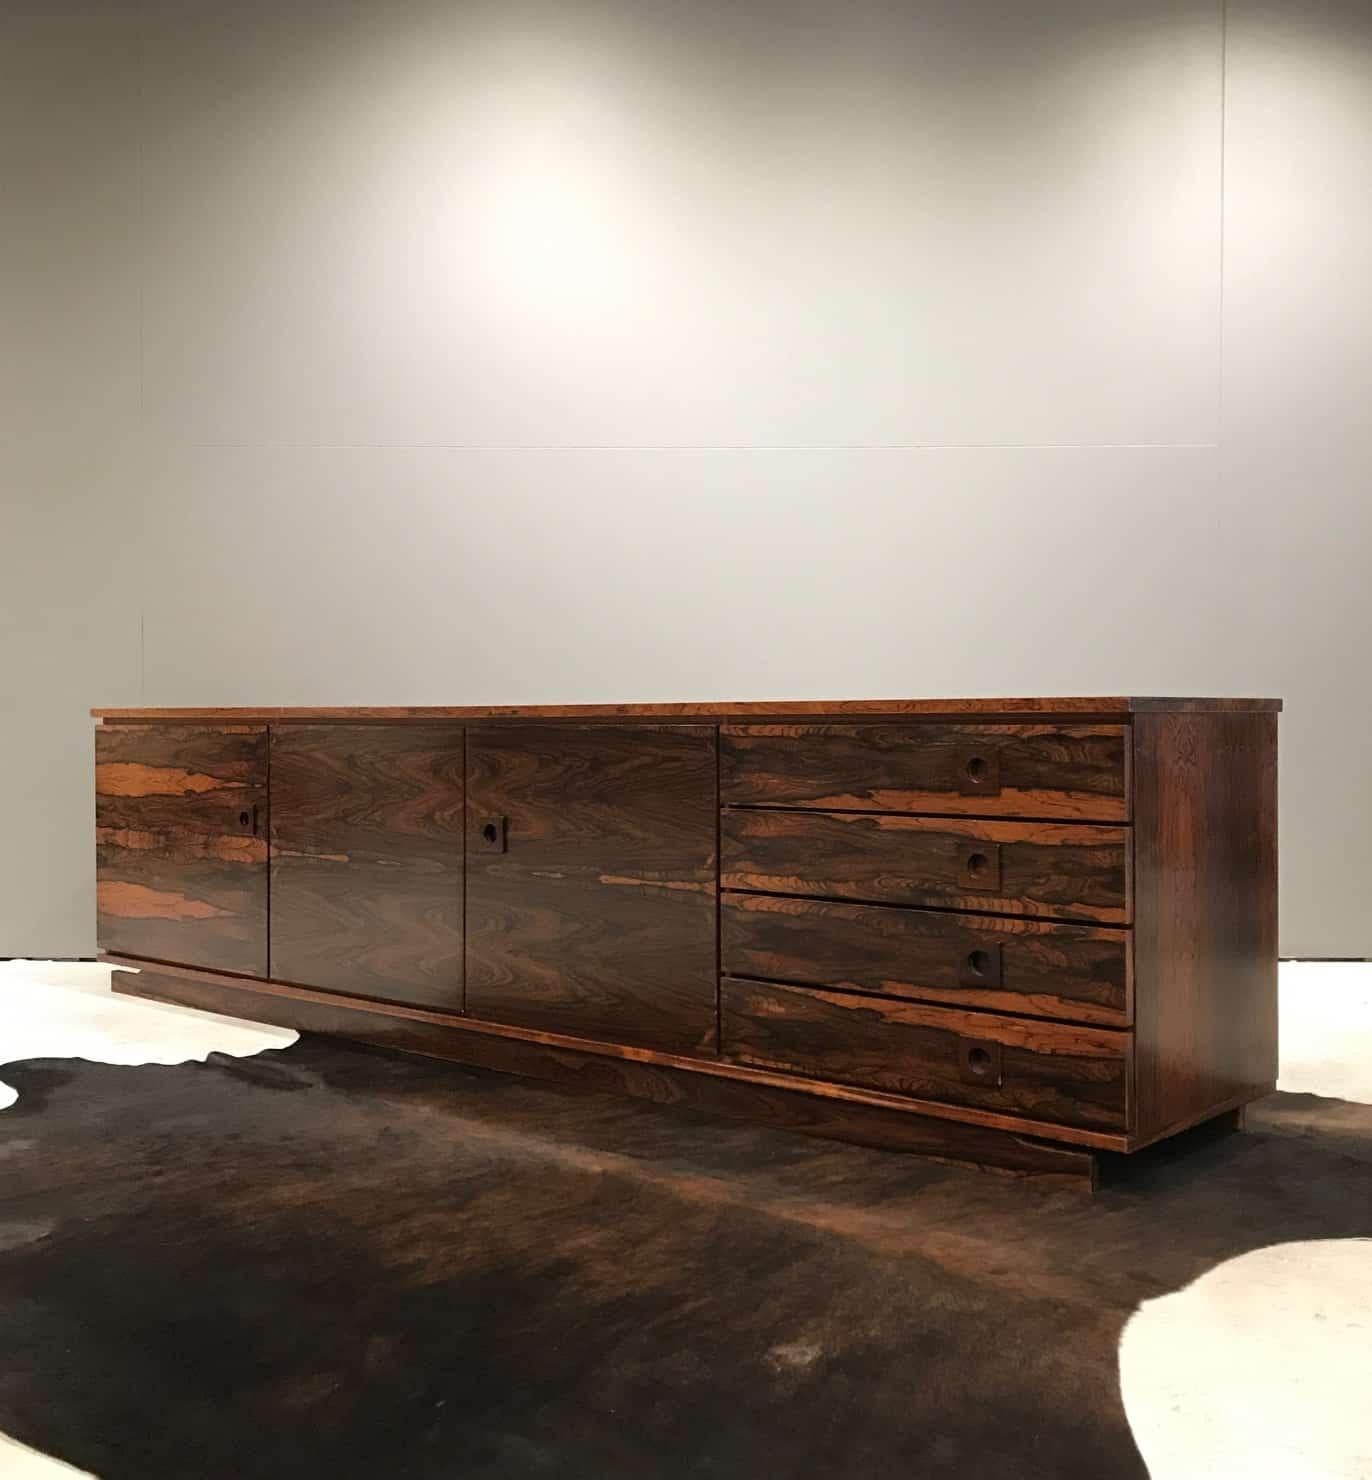 Mid-Century Modern Danish sideboard made from Palisander. Low and sleek, this sideboard looks and feels exotic and stylish.
This item has a Cities certificate.